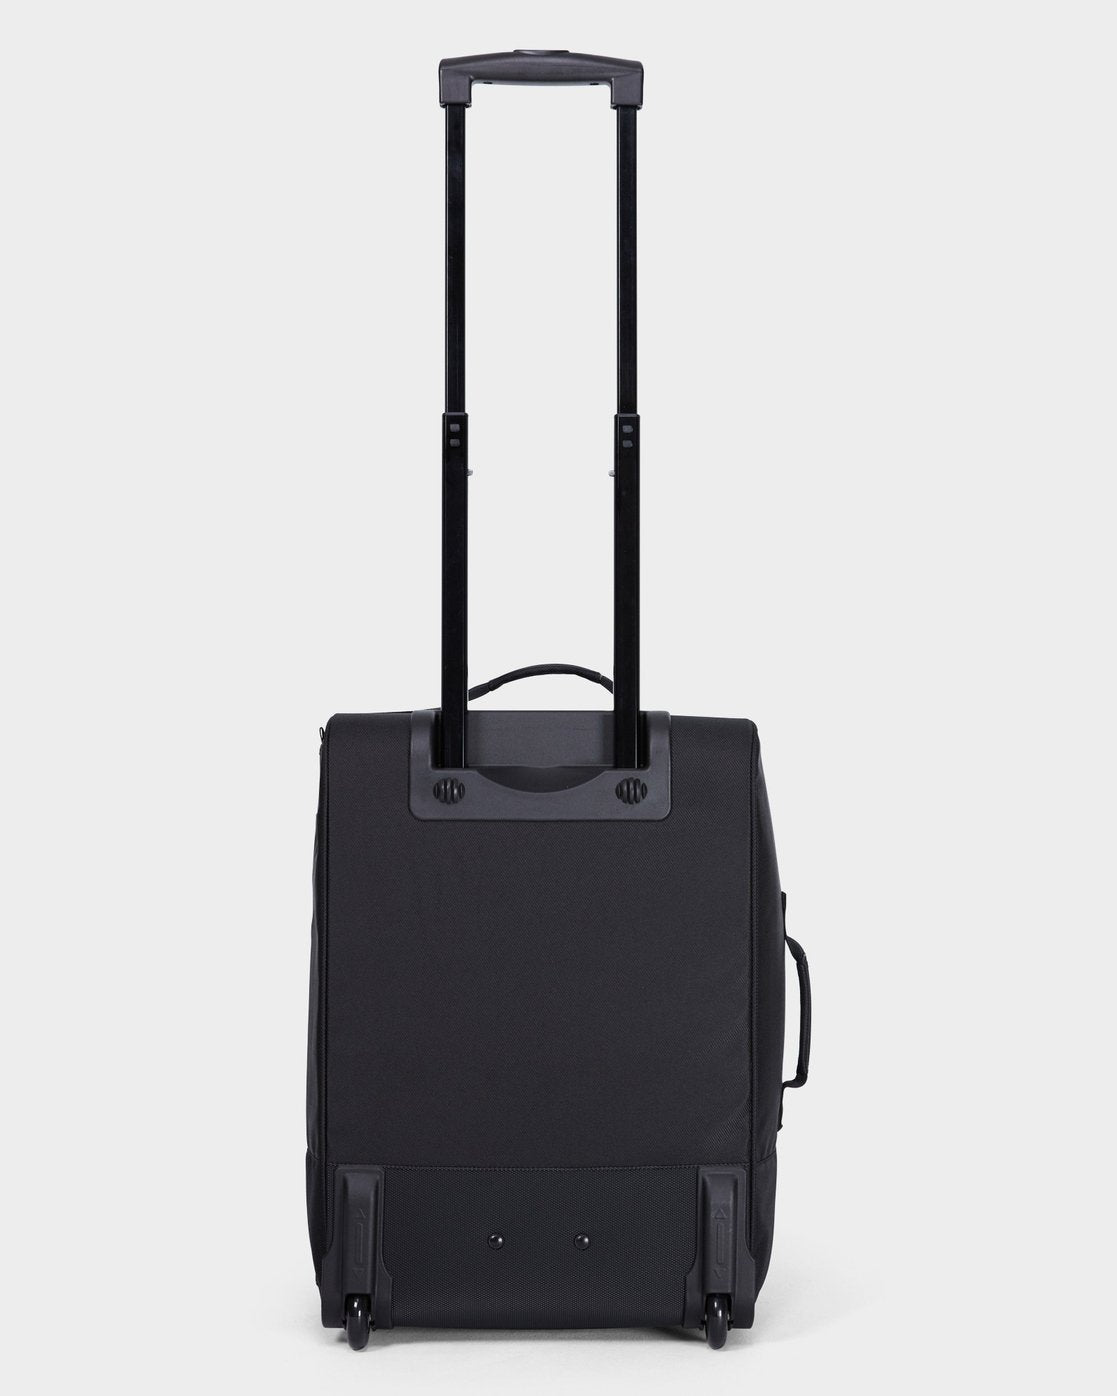 BOOSTER CARRY ON TRAVEL BAG